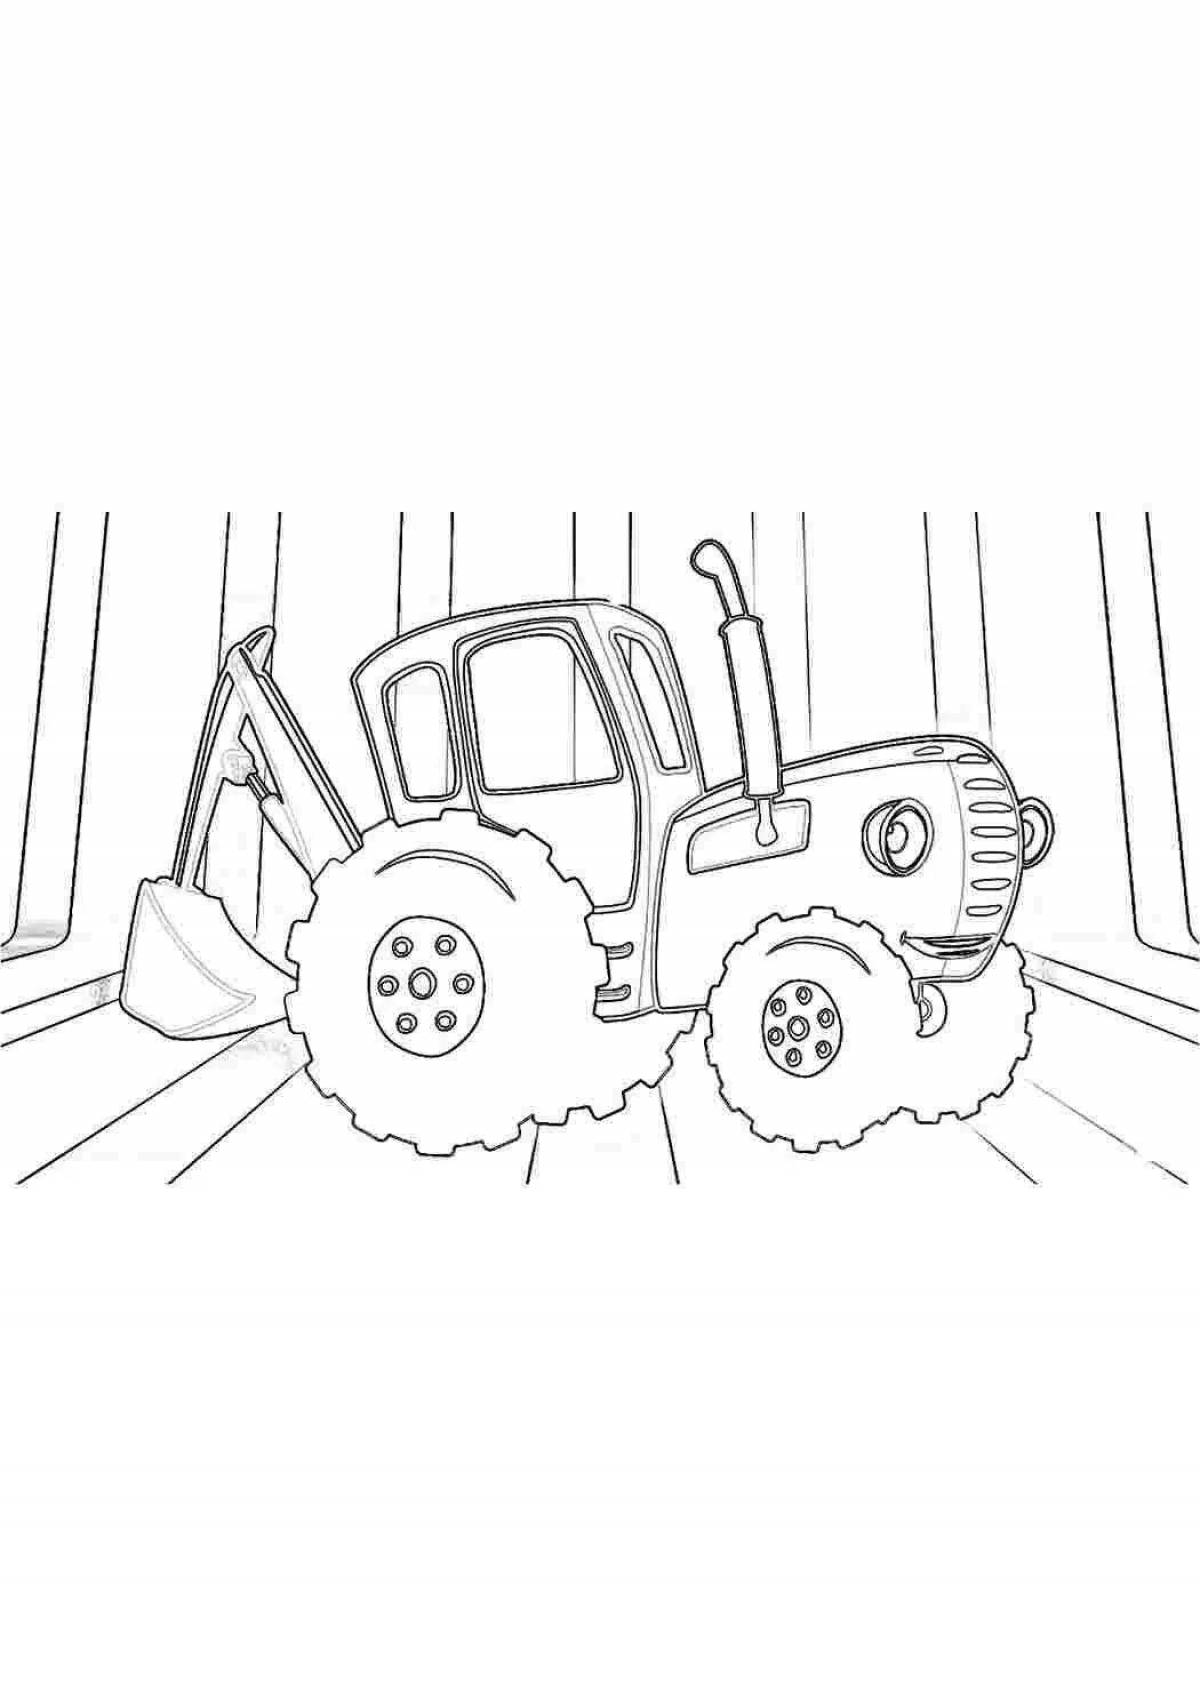 Adorable blue tractor coloring page for kids